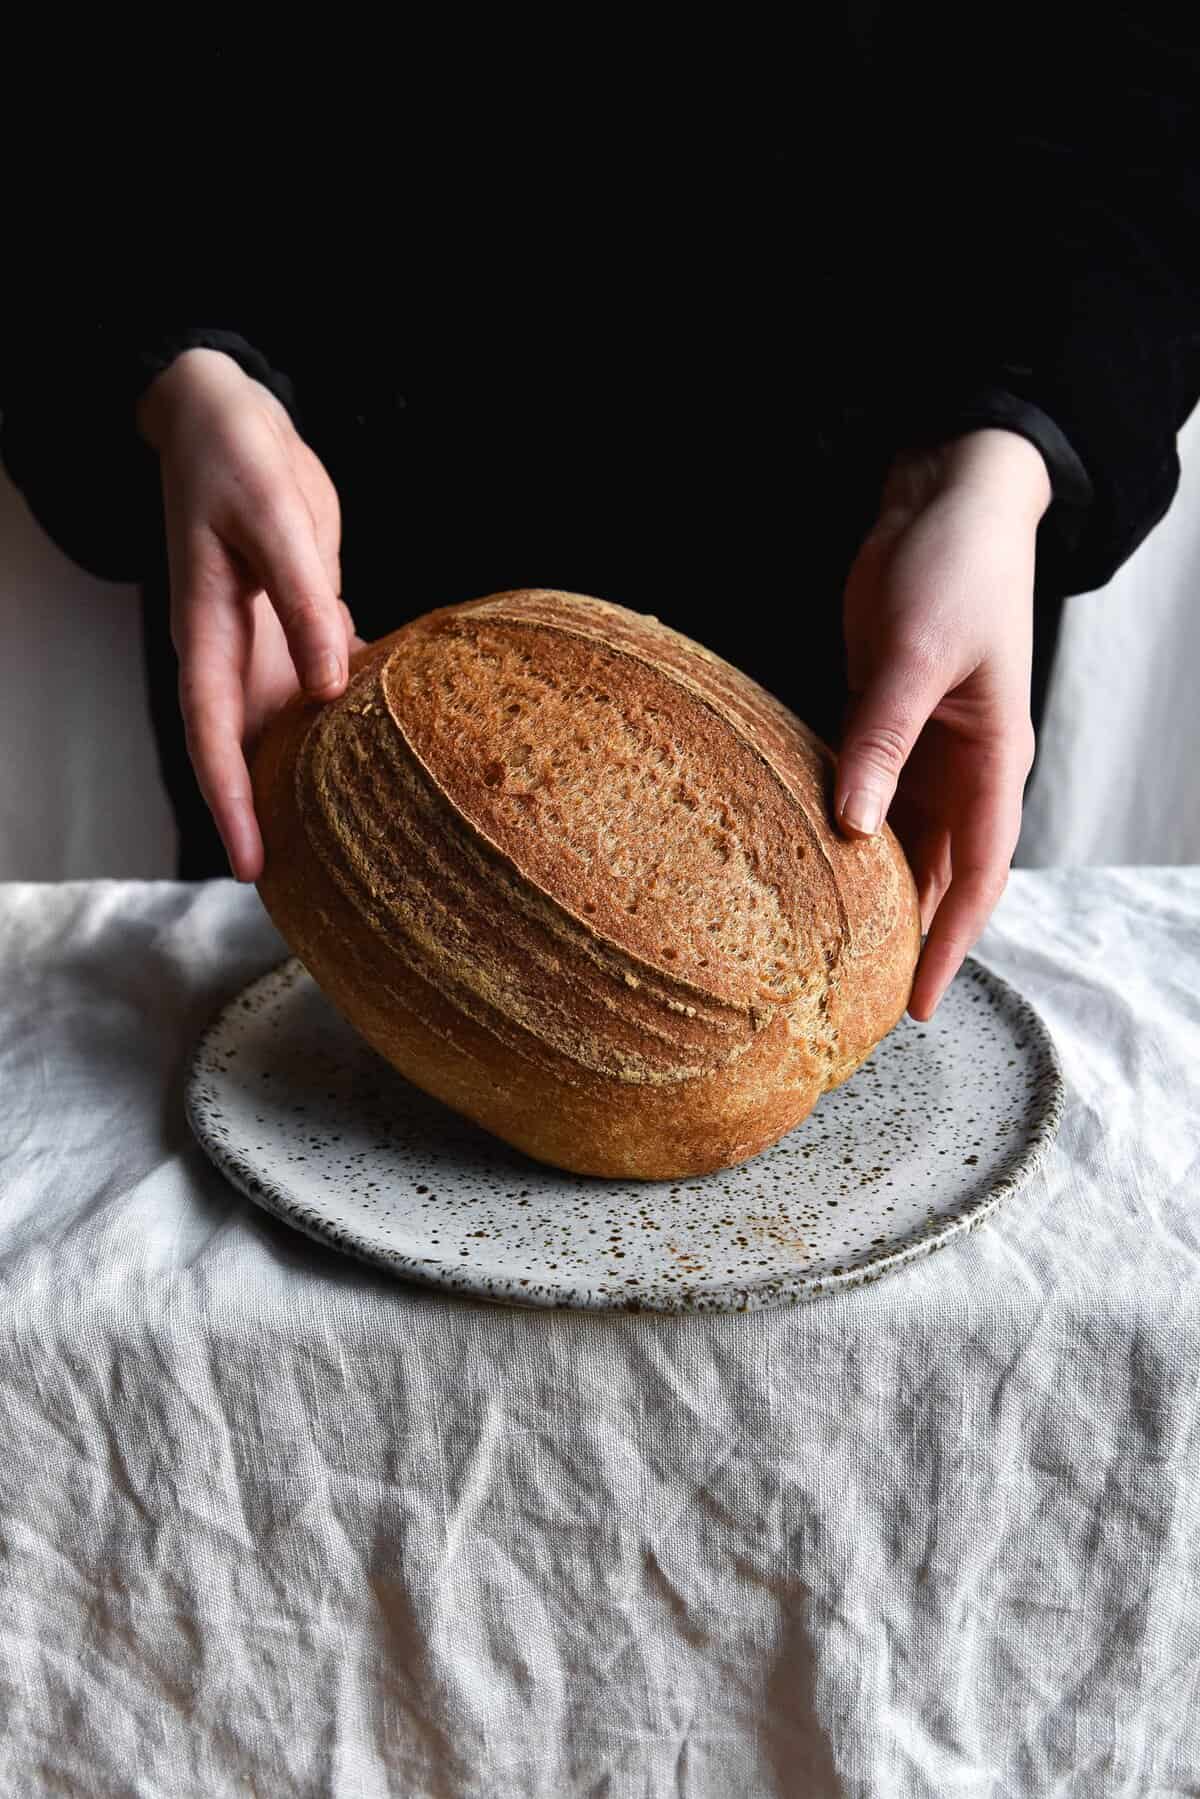 A loaf of gluten free sourdough bread being held up to face the camera. It sits on a speckled white ceramic plate on a white linen tablecloth. The person in the background is wearing a black velvet jacket.